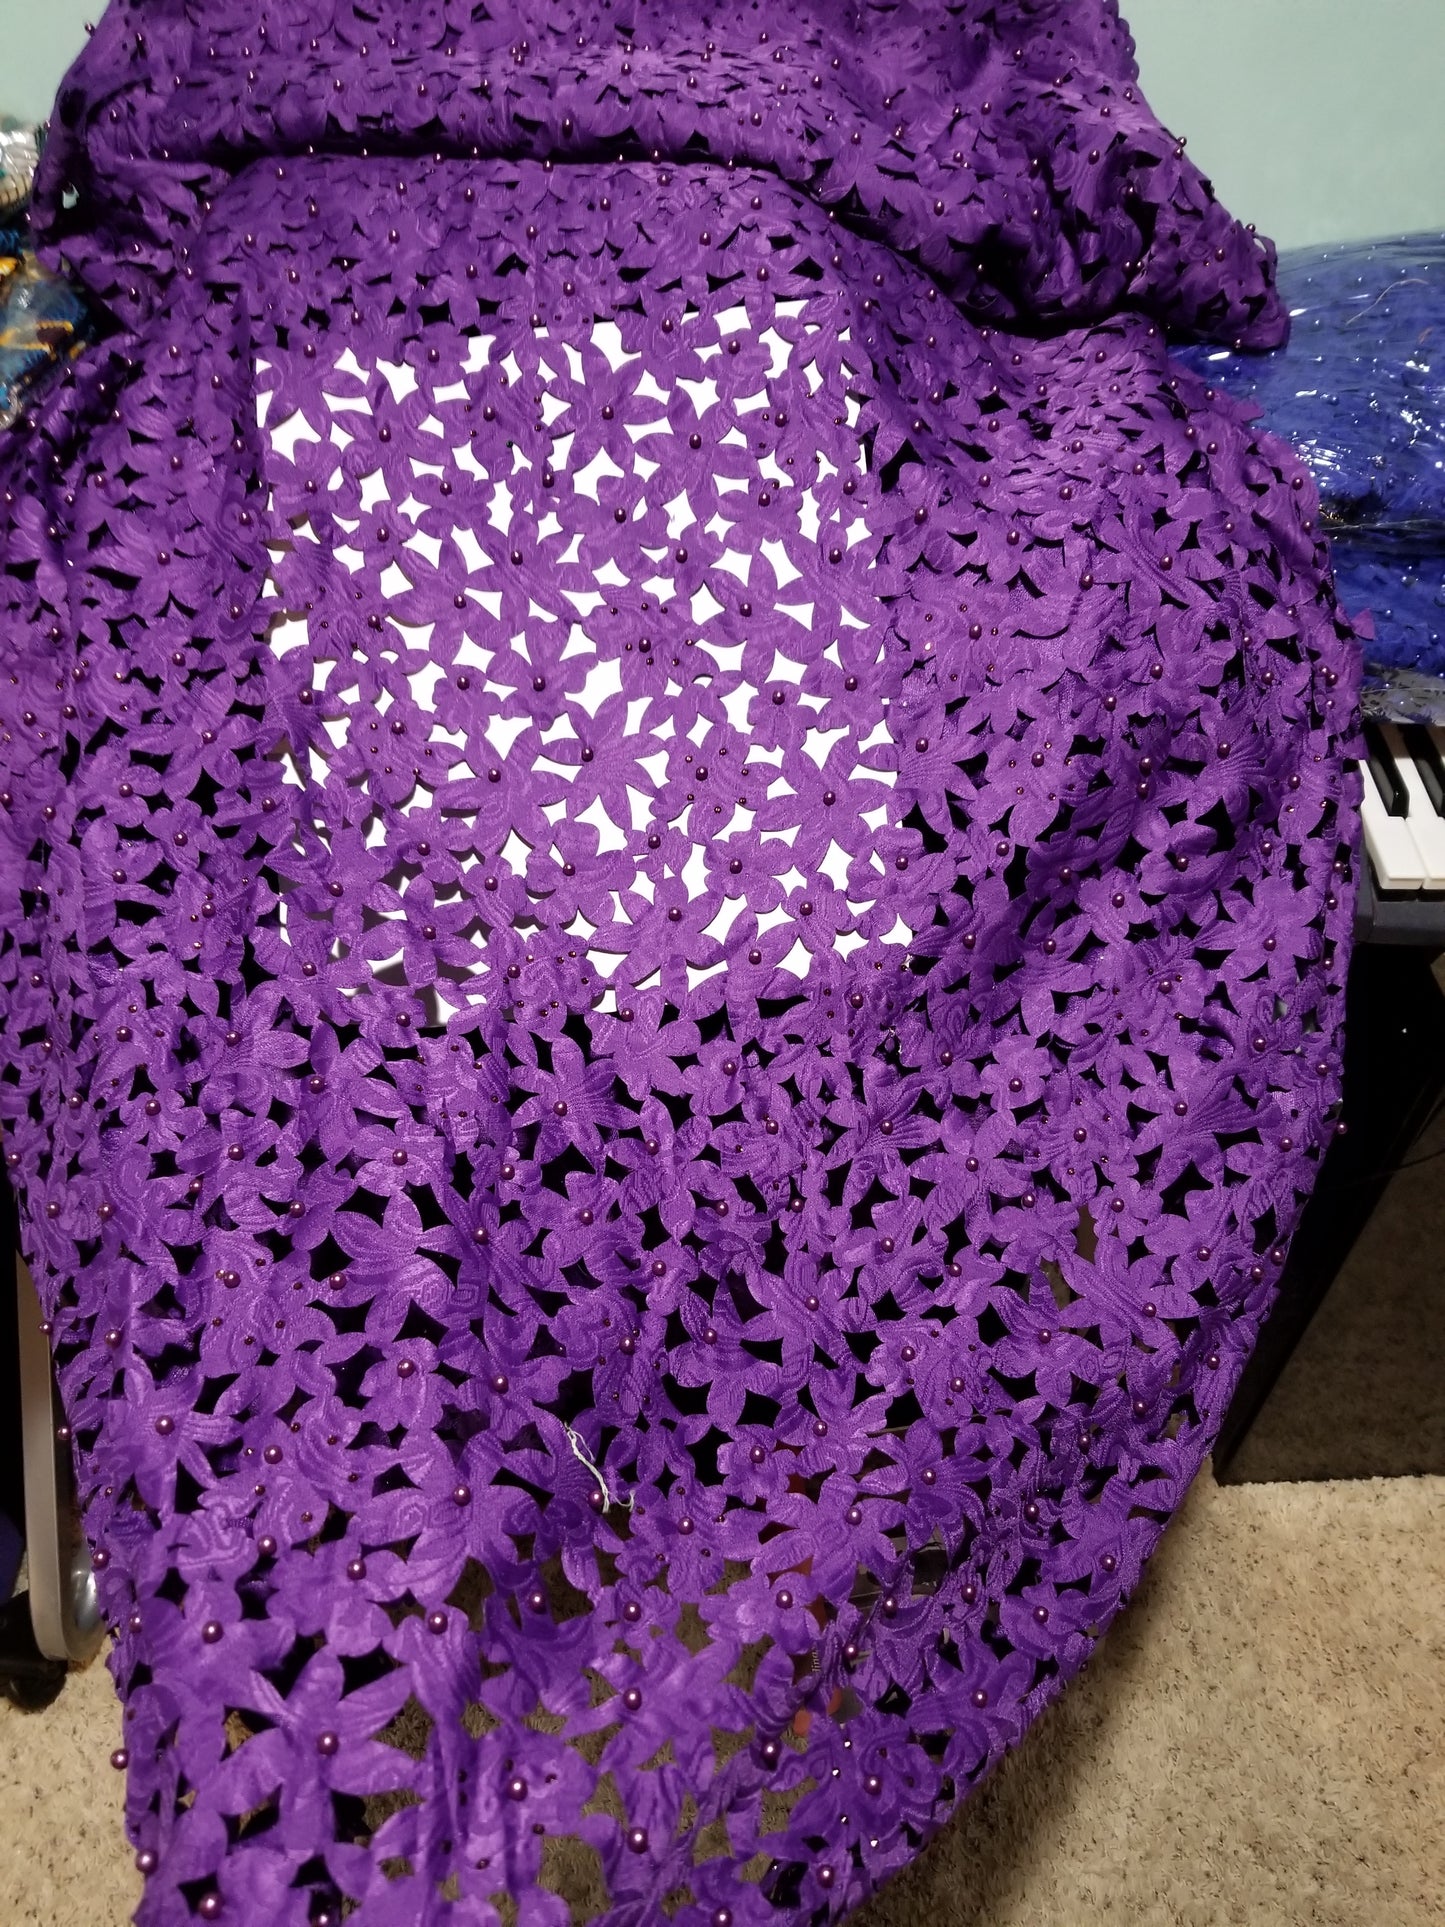 New arrival top quality purple  Laser cut African French Lace fabric. Beaded amd stones to perfection. Full lacer cut. Sold per 5yds. Price is for 5yds